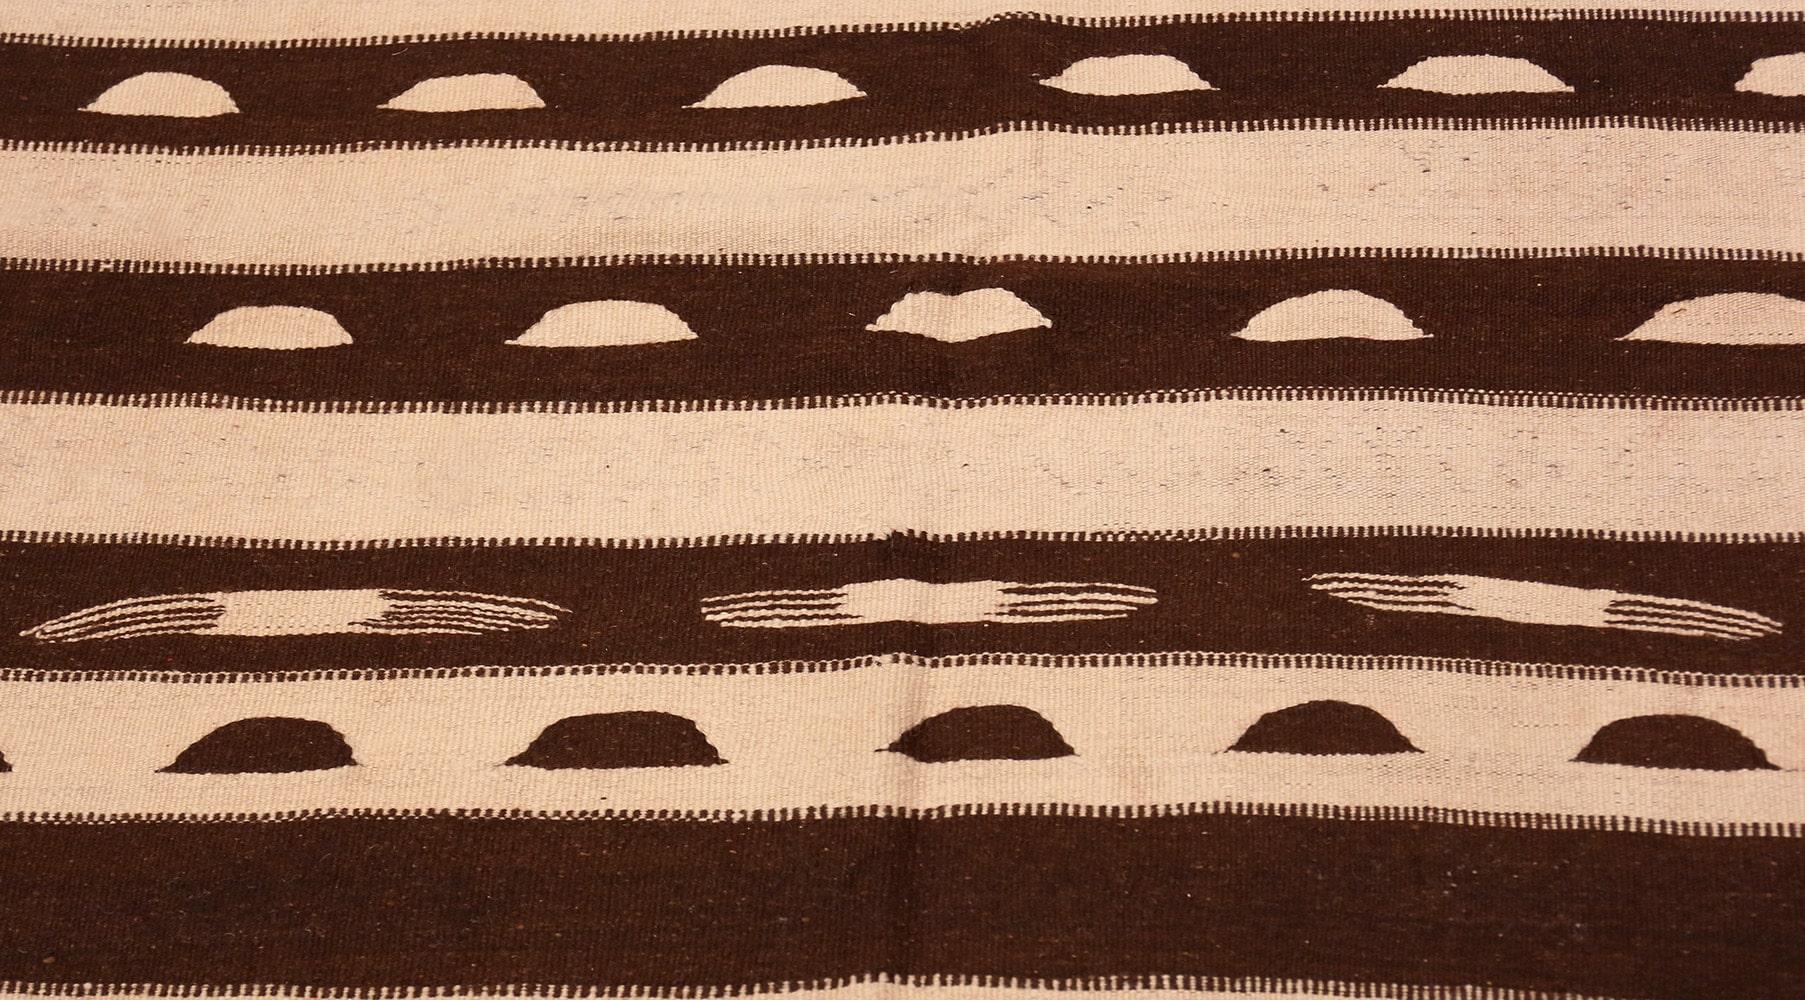 Beautiful brown and cream flat-woven vintage Moroccan Kilim rug, country of origin: Morocco, date: circa mid-20th century. Size: 4 ft 7 in x 9 ft 8 in (1.4 m x 2.95 m)

This cleverly composed vintage flat-weave Moroccan Kilim rug features an